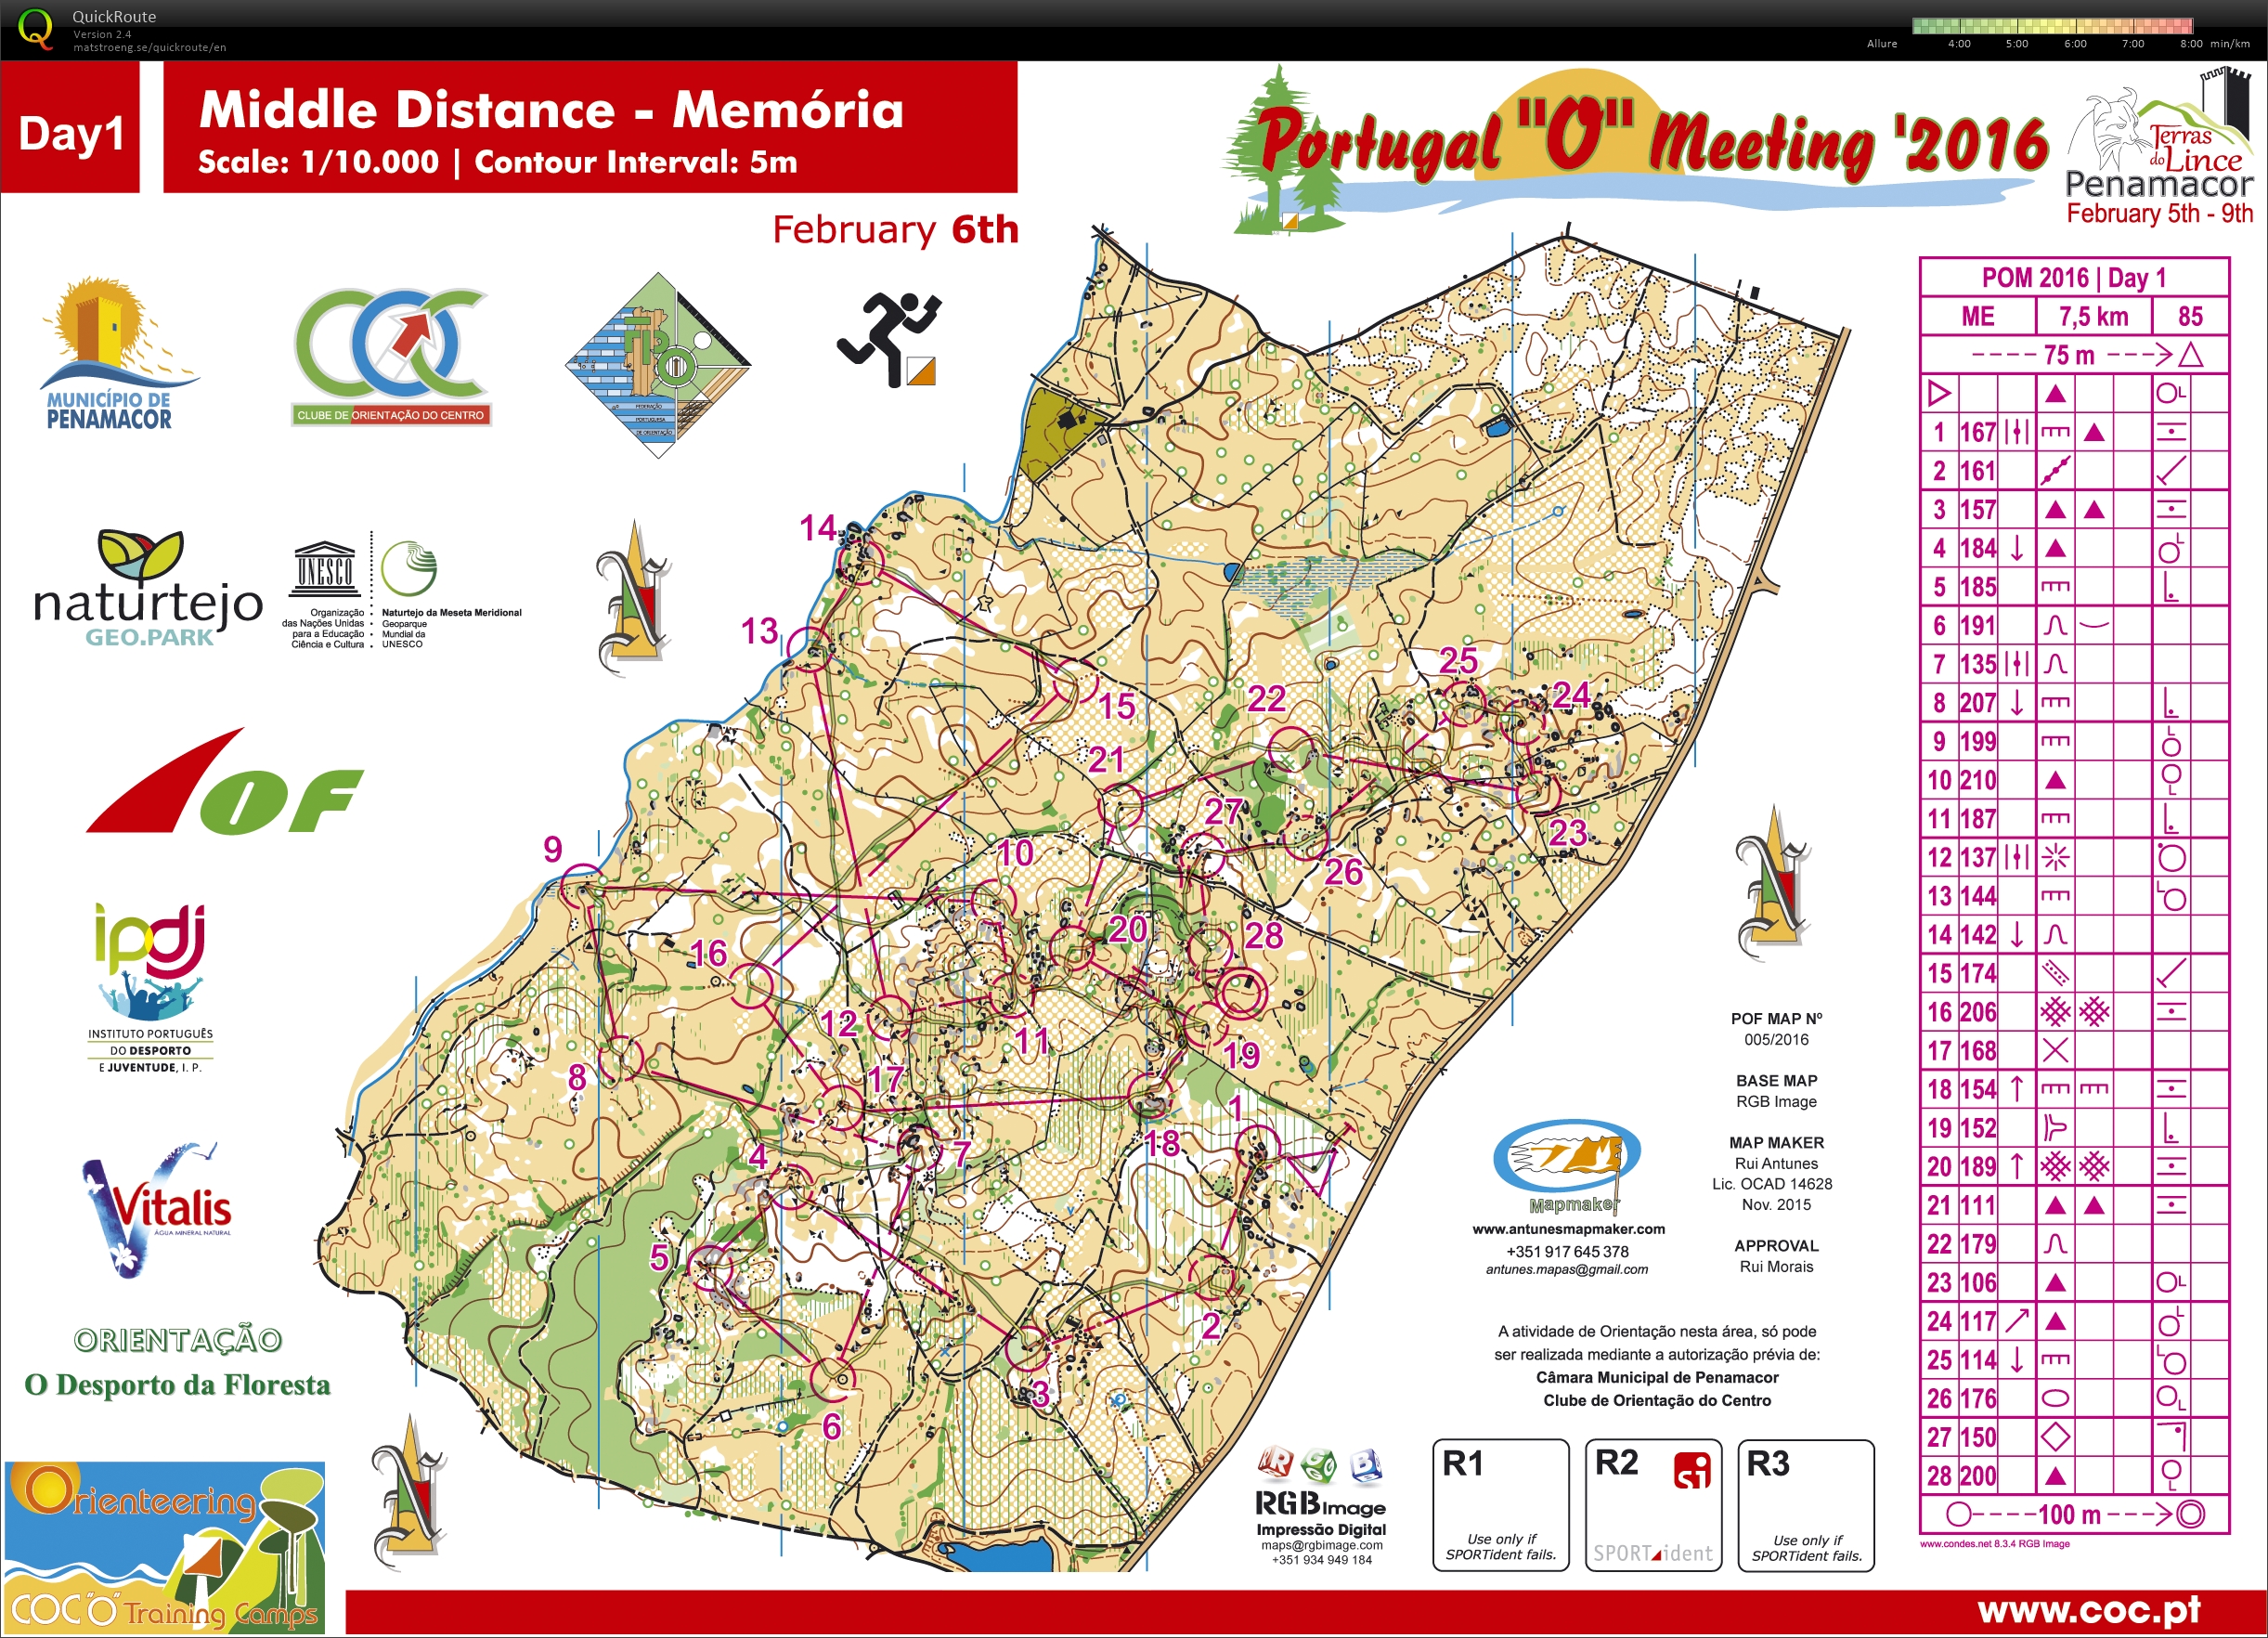 Portugal O Meeting Stage 1 (06/02/2016)